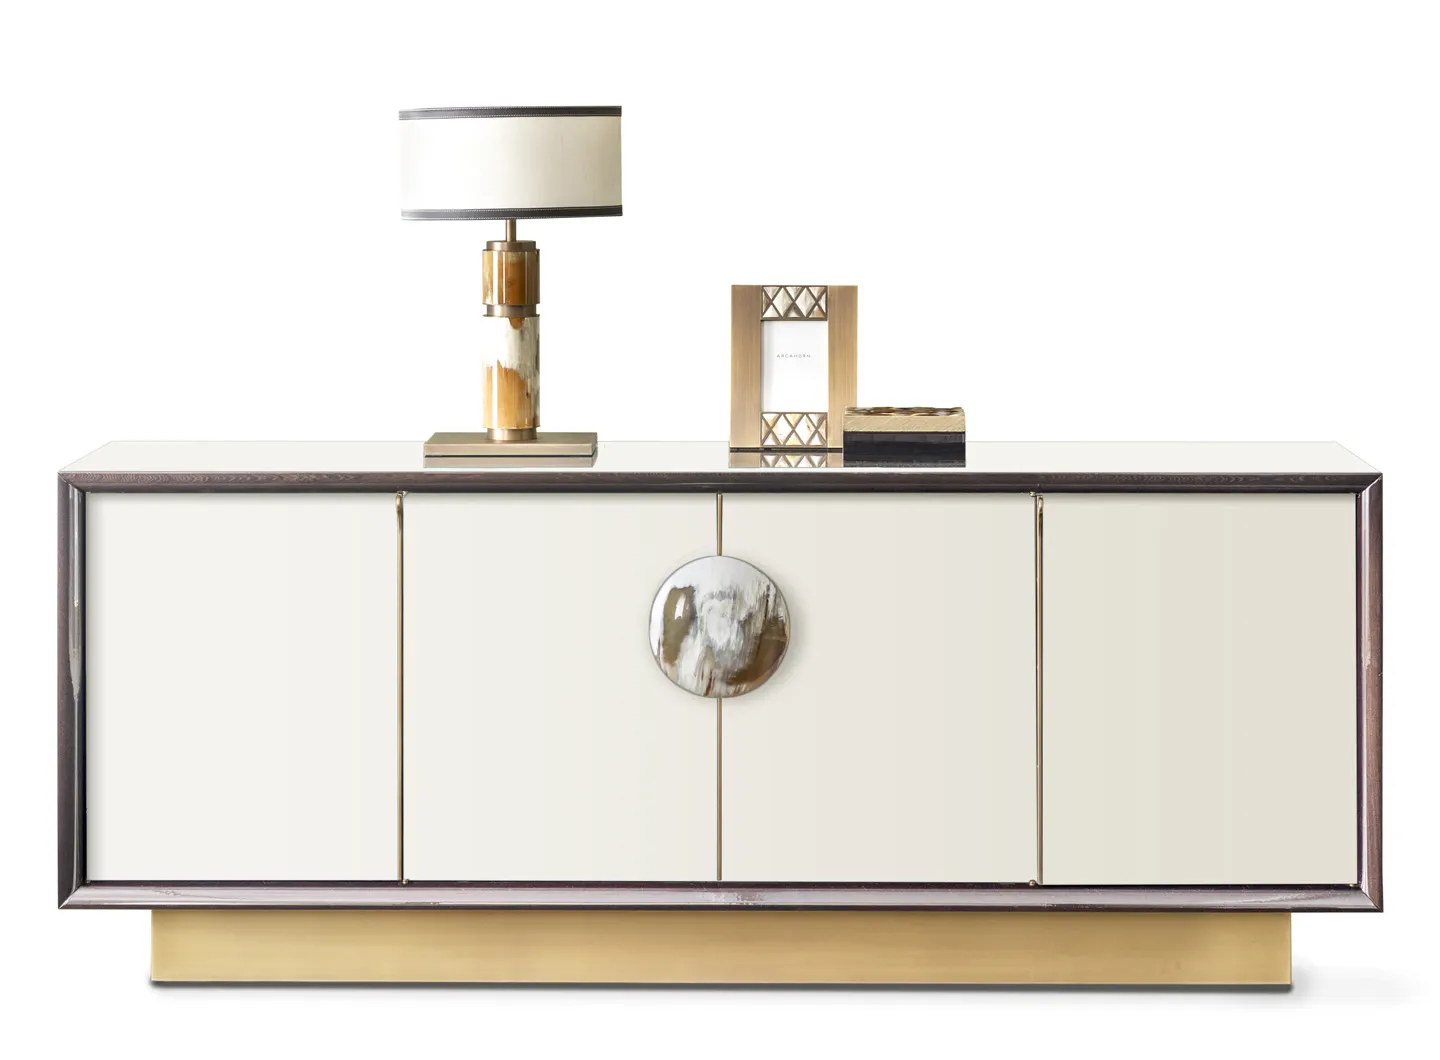 Arcahorn - Helios cabinet in ivory lacquer